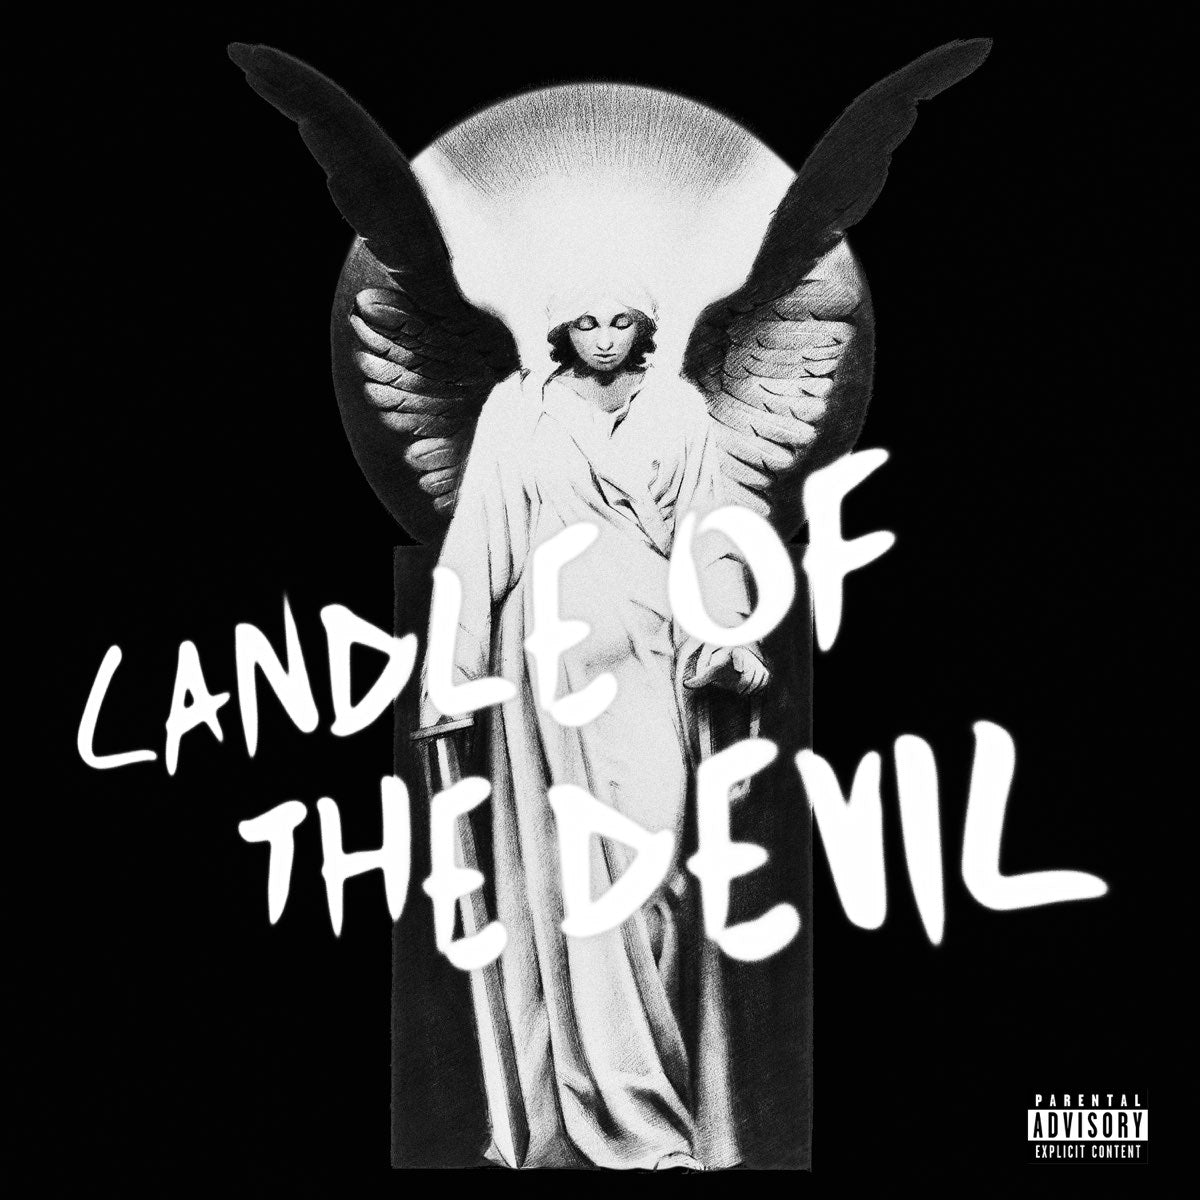 R-Mean & Scott Storch feat. Nas - 'Candle of the Devil' [Official Ringtone for Android]